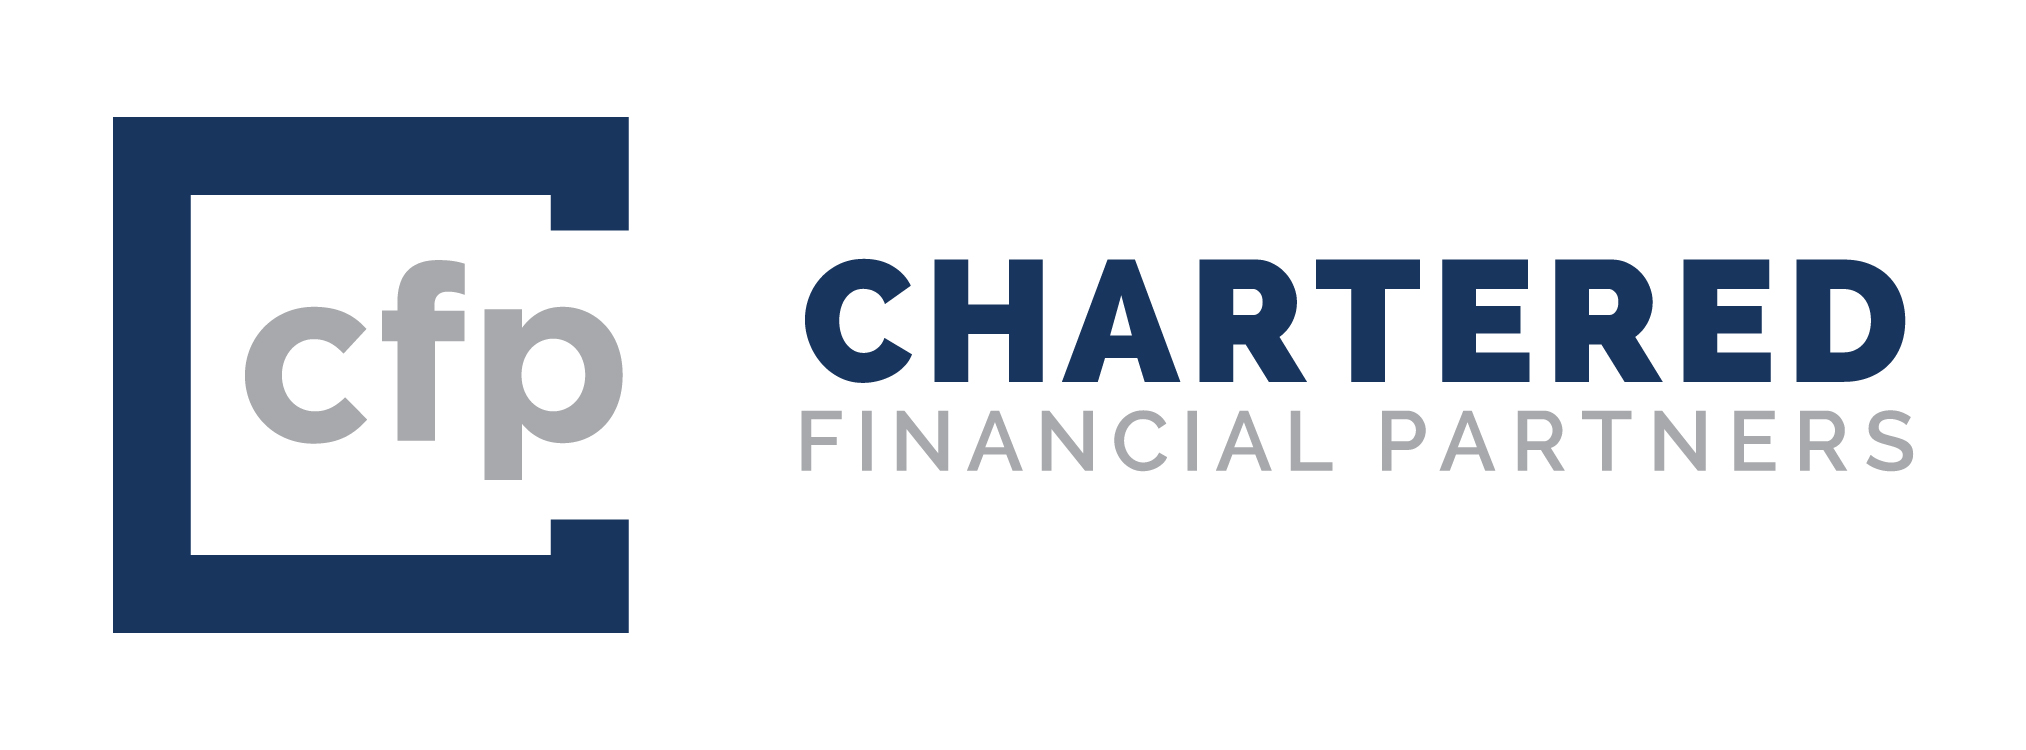 Chartered Financial Partners Limited